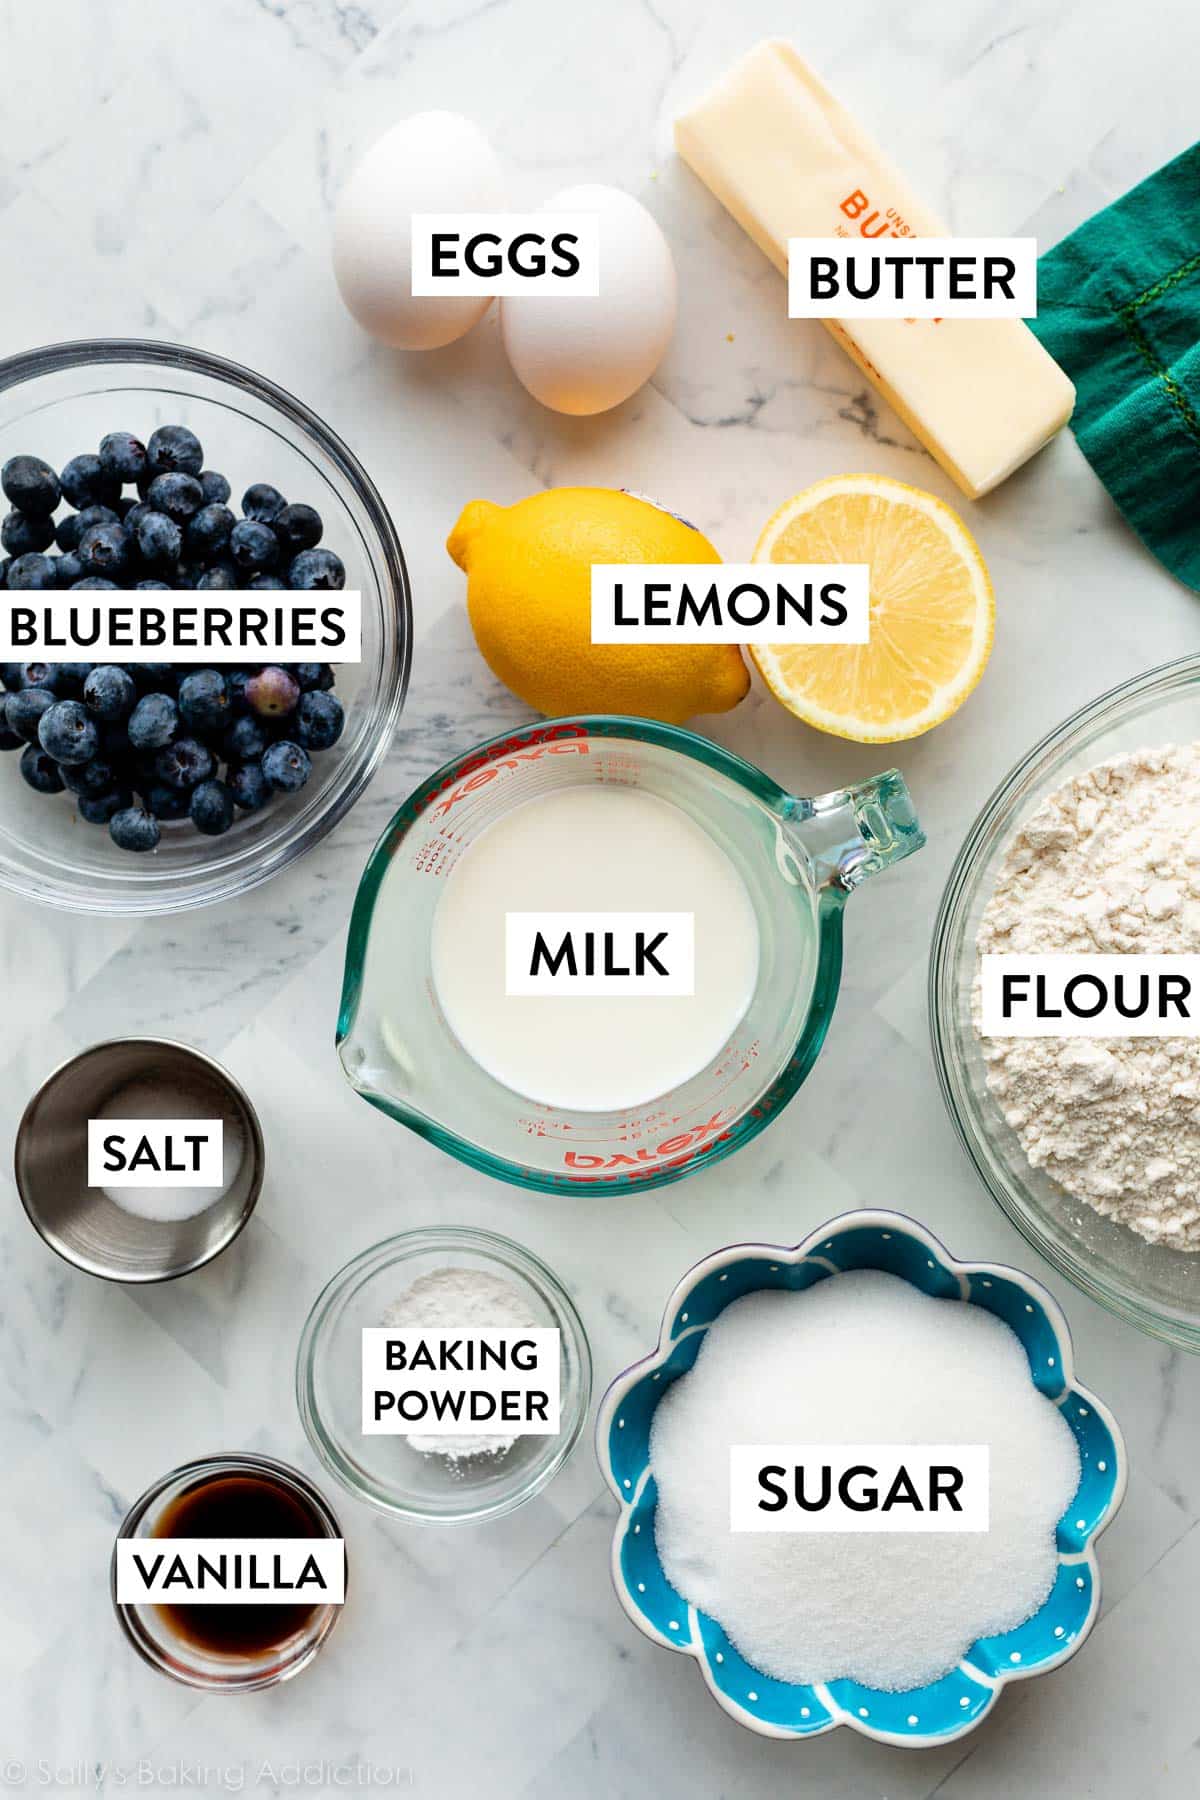 lemons, milk, flour, sugar, baking powder, butter, blueberries, and other ingredients on counter.